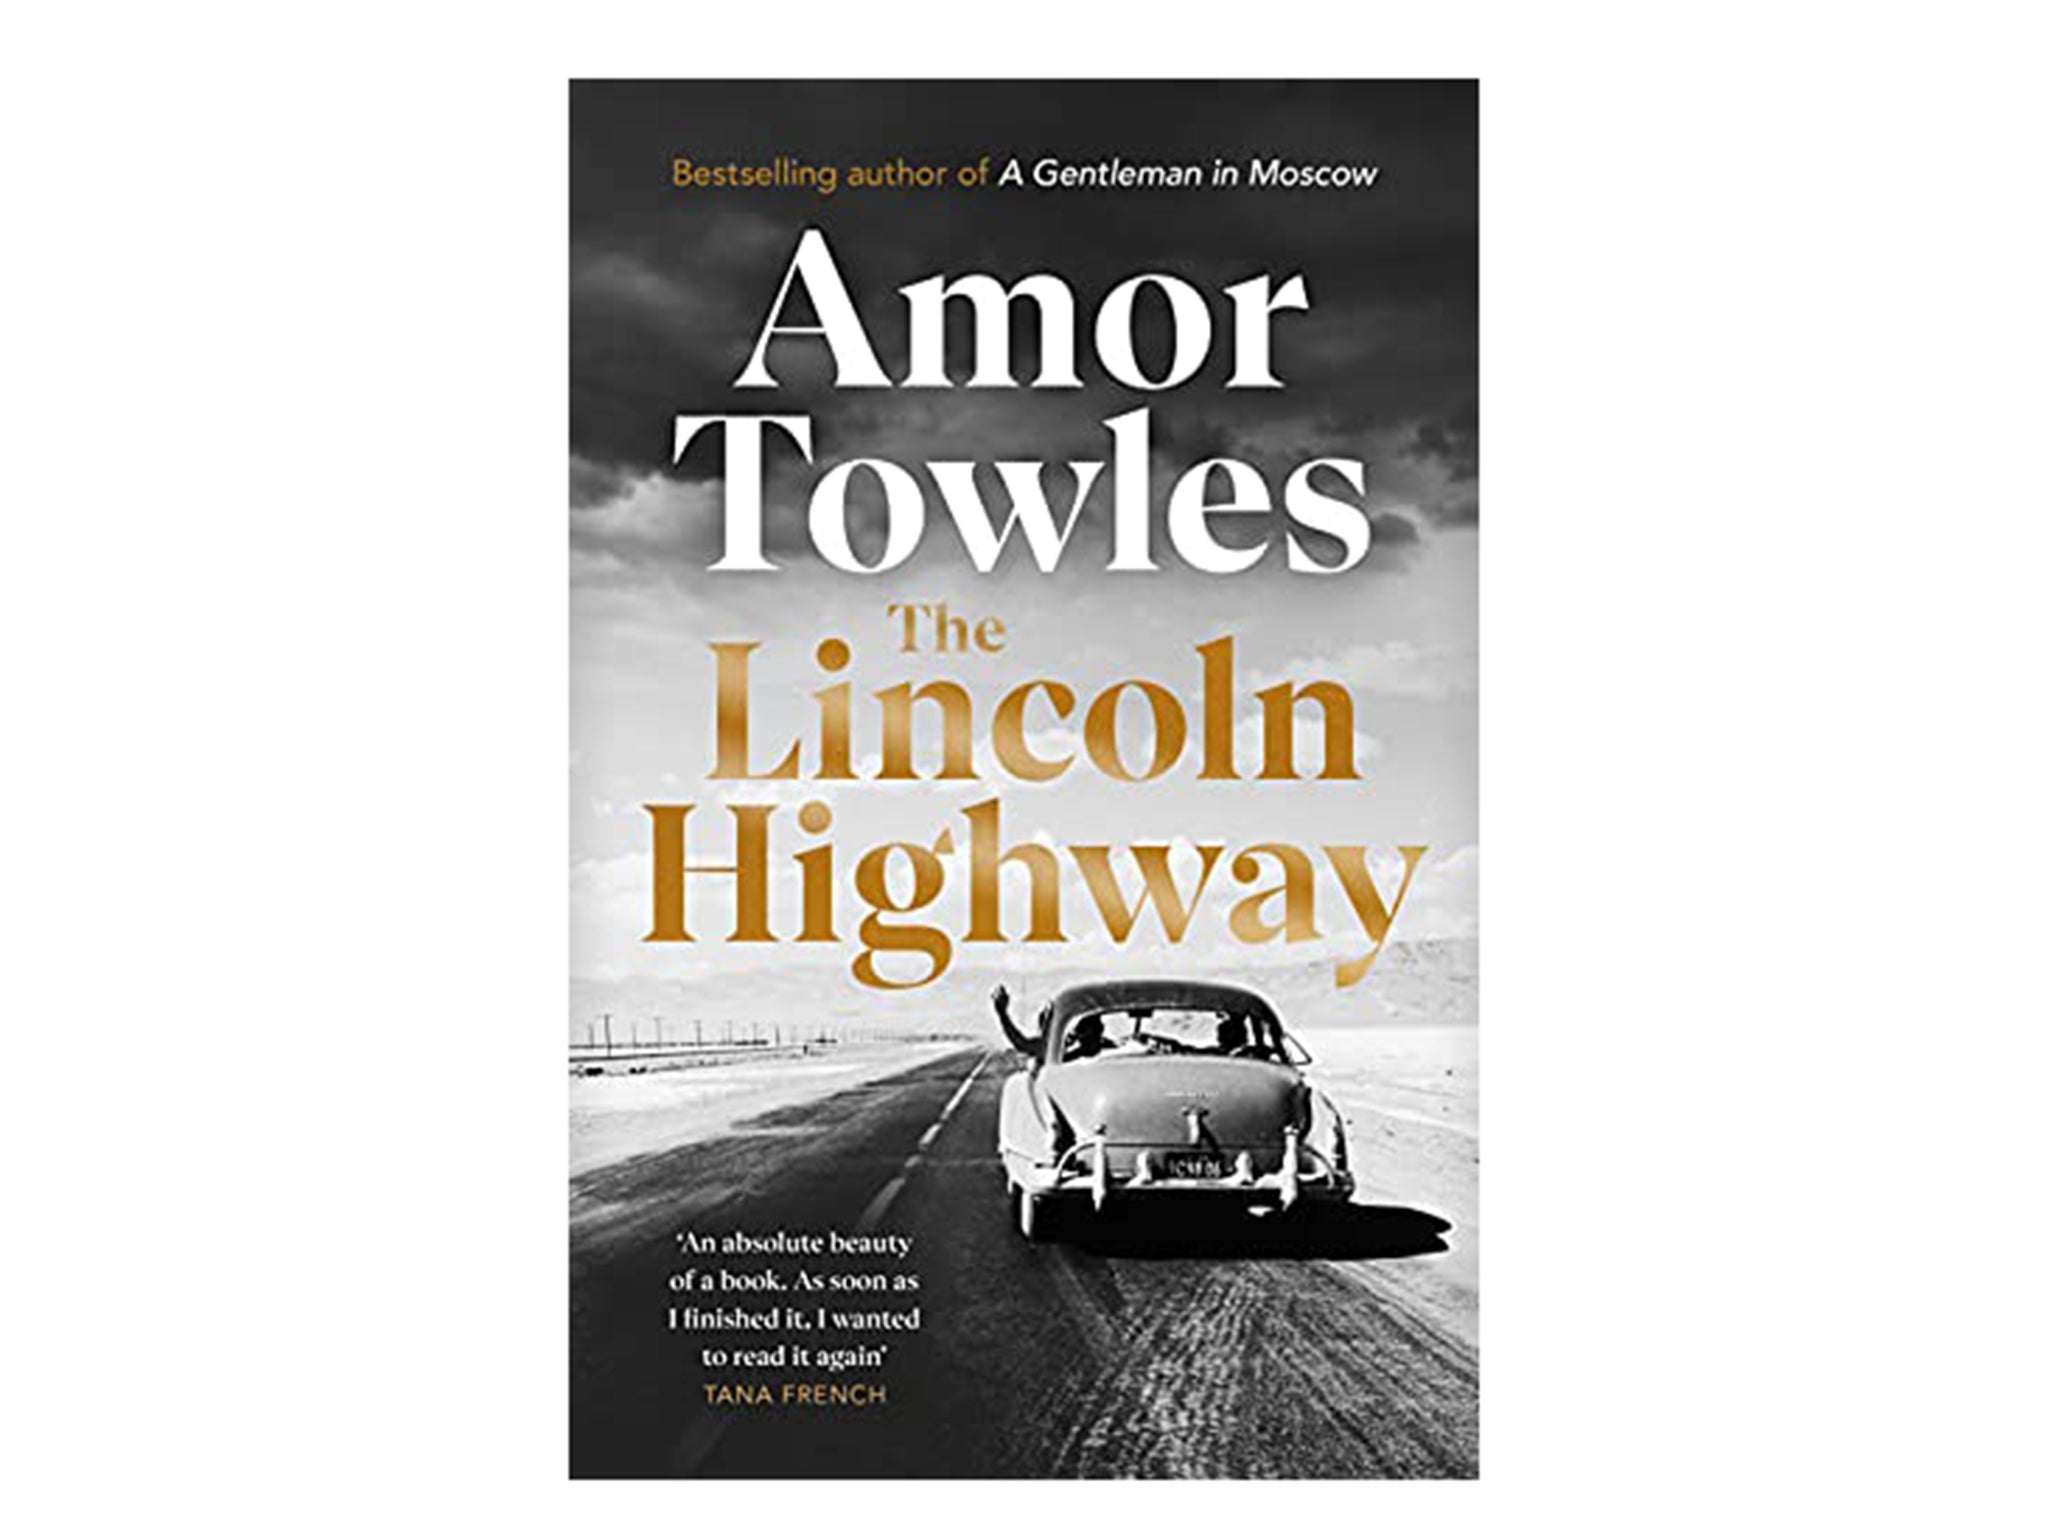 ‘The Lincoln Highway’ by Amor Towles 